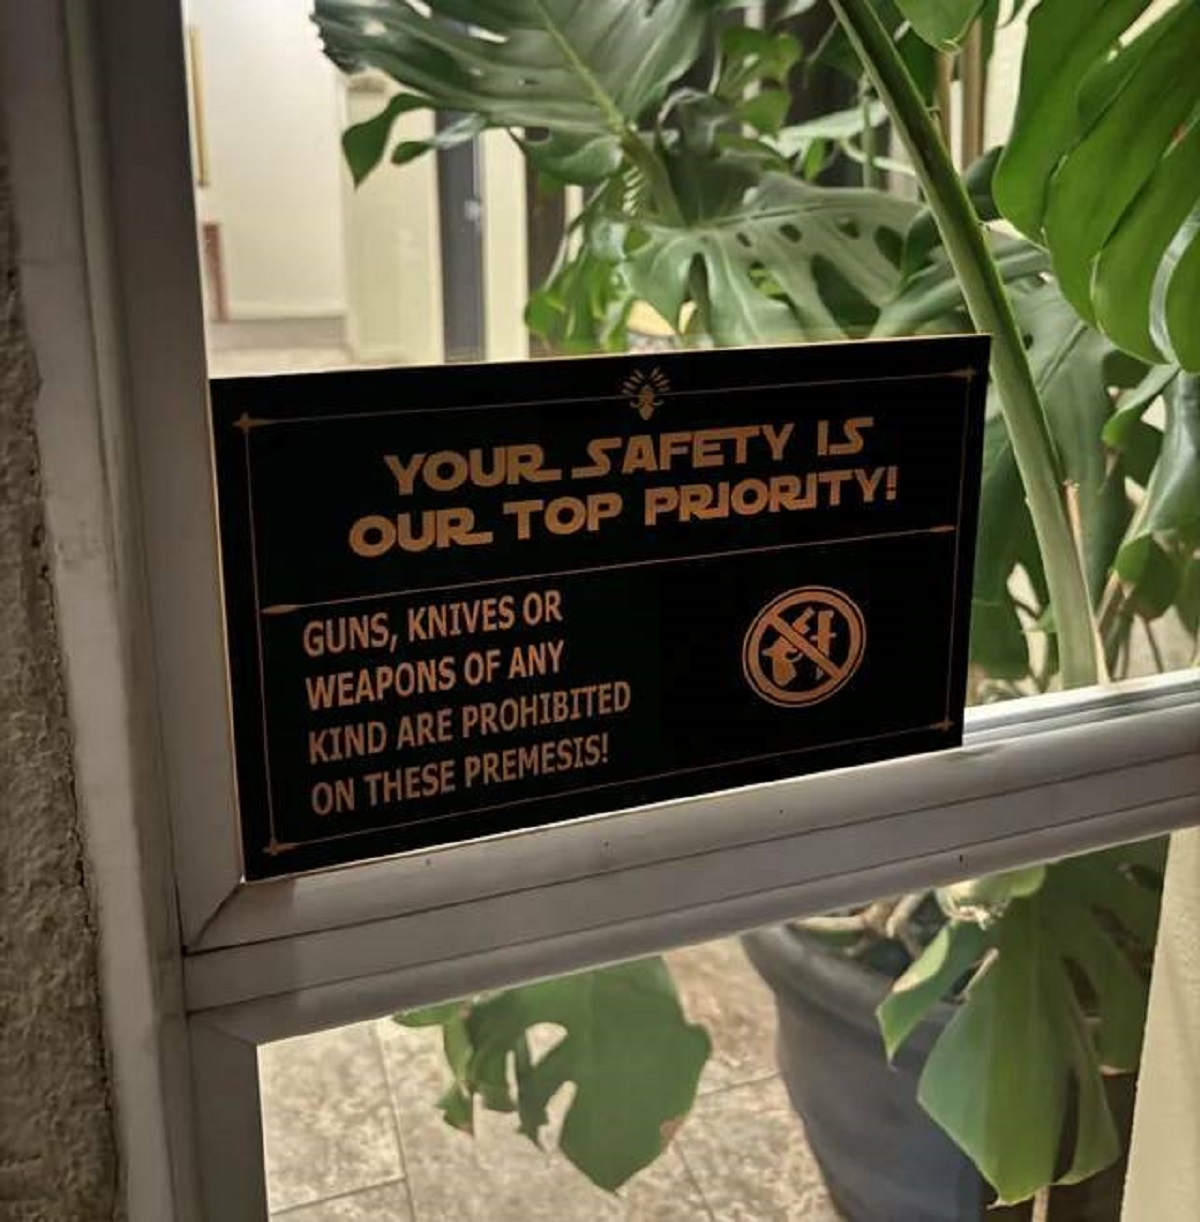 signage - Your Safety Is Our Top Priority! Guns, Knives Or Weapons Of Any Kind Are Prohibited On These Premesis!